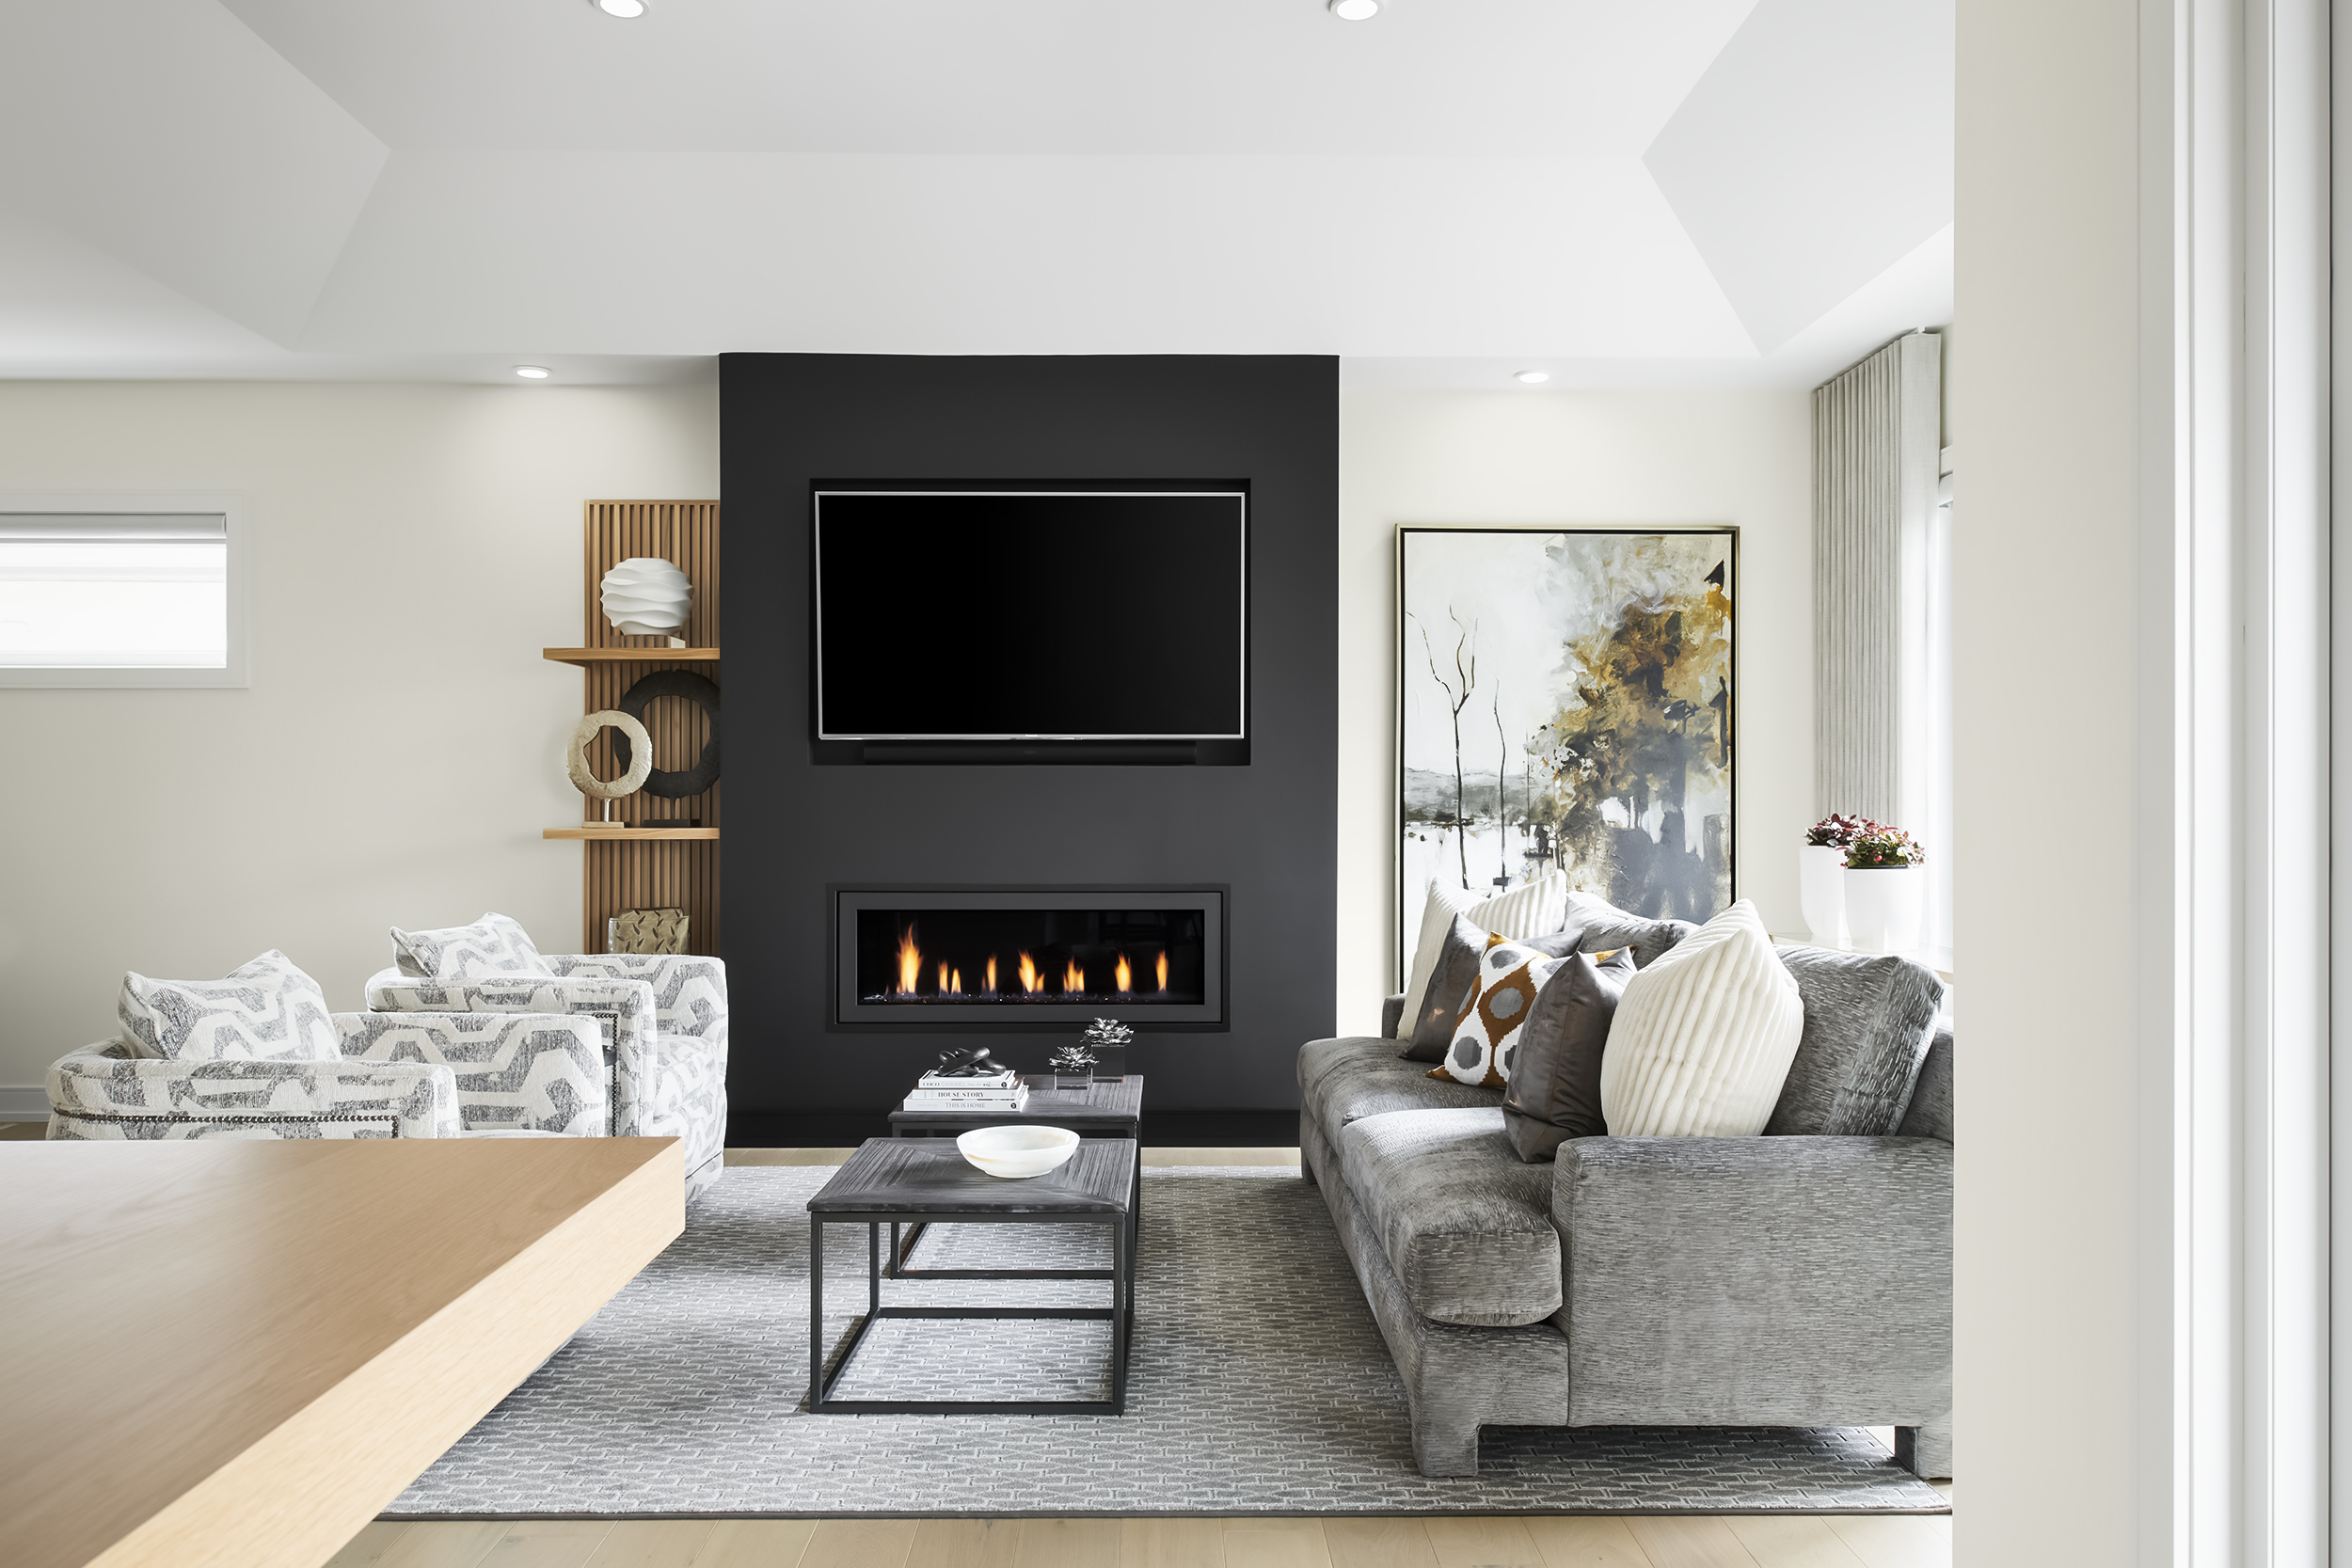 Nicole_Aubrey_Photography_Leanne_Mosquite_Design_Living_Room_Fireplace_1